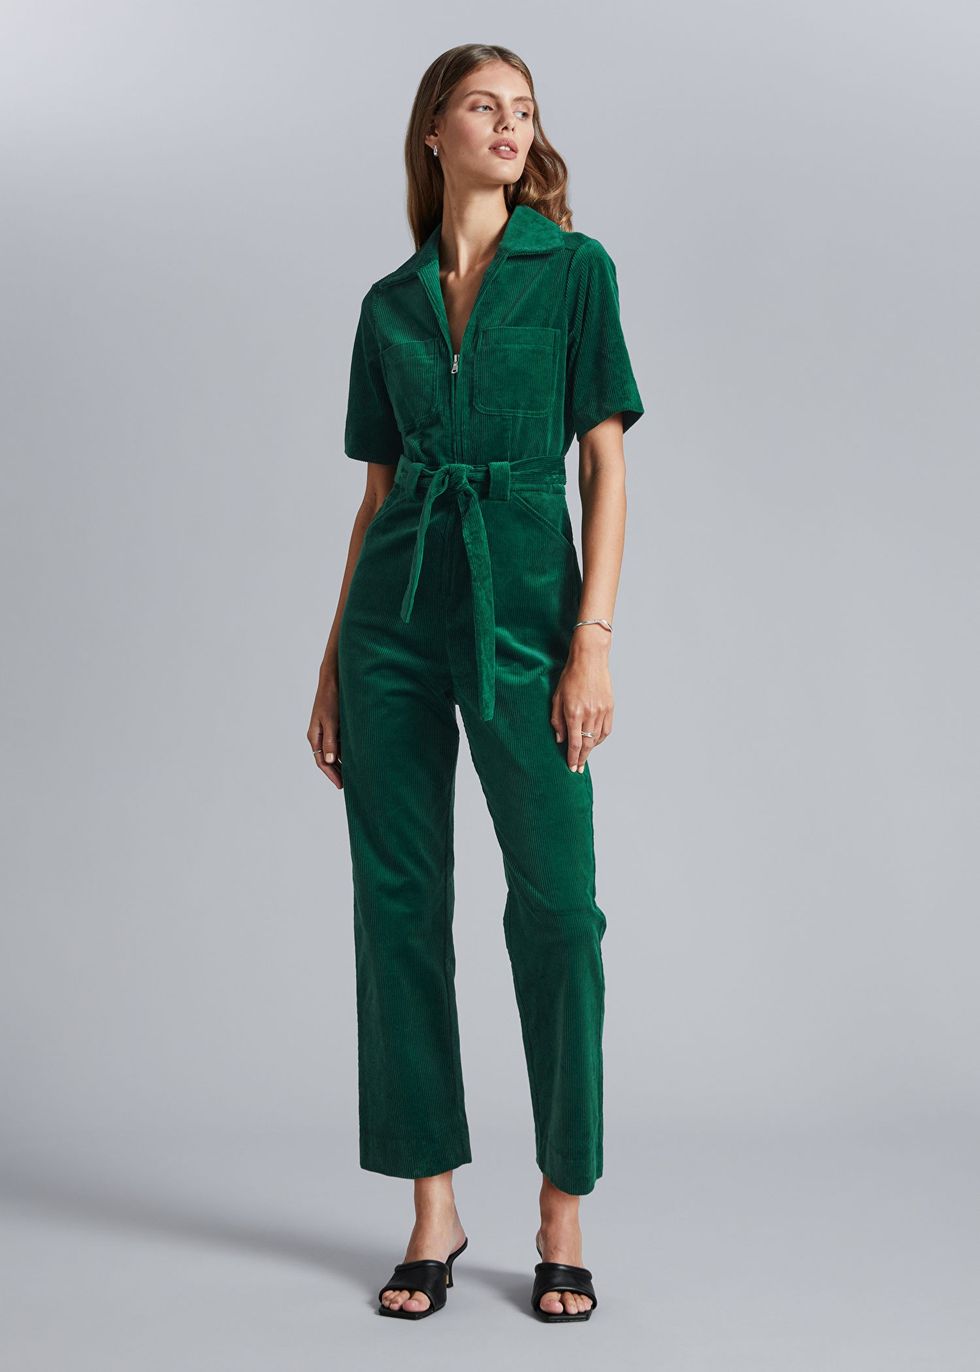 & Other Stories Belted Corduroy Jumpsuit